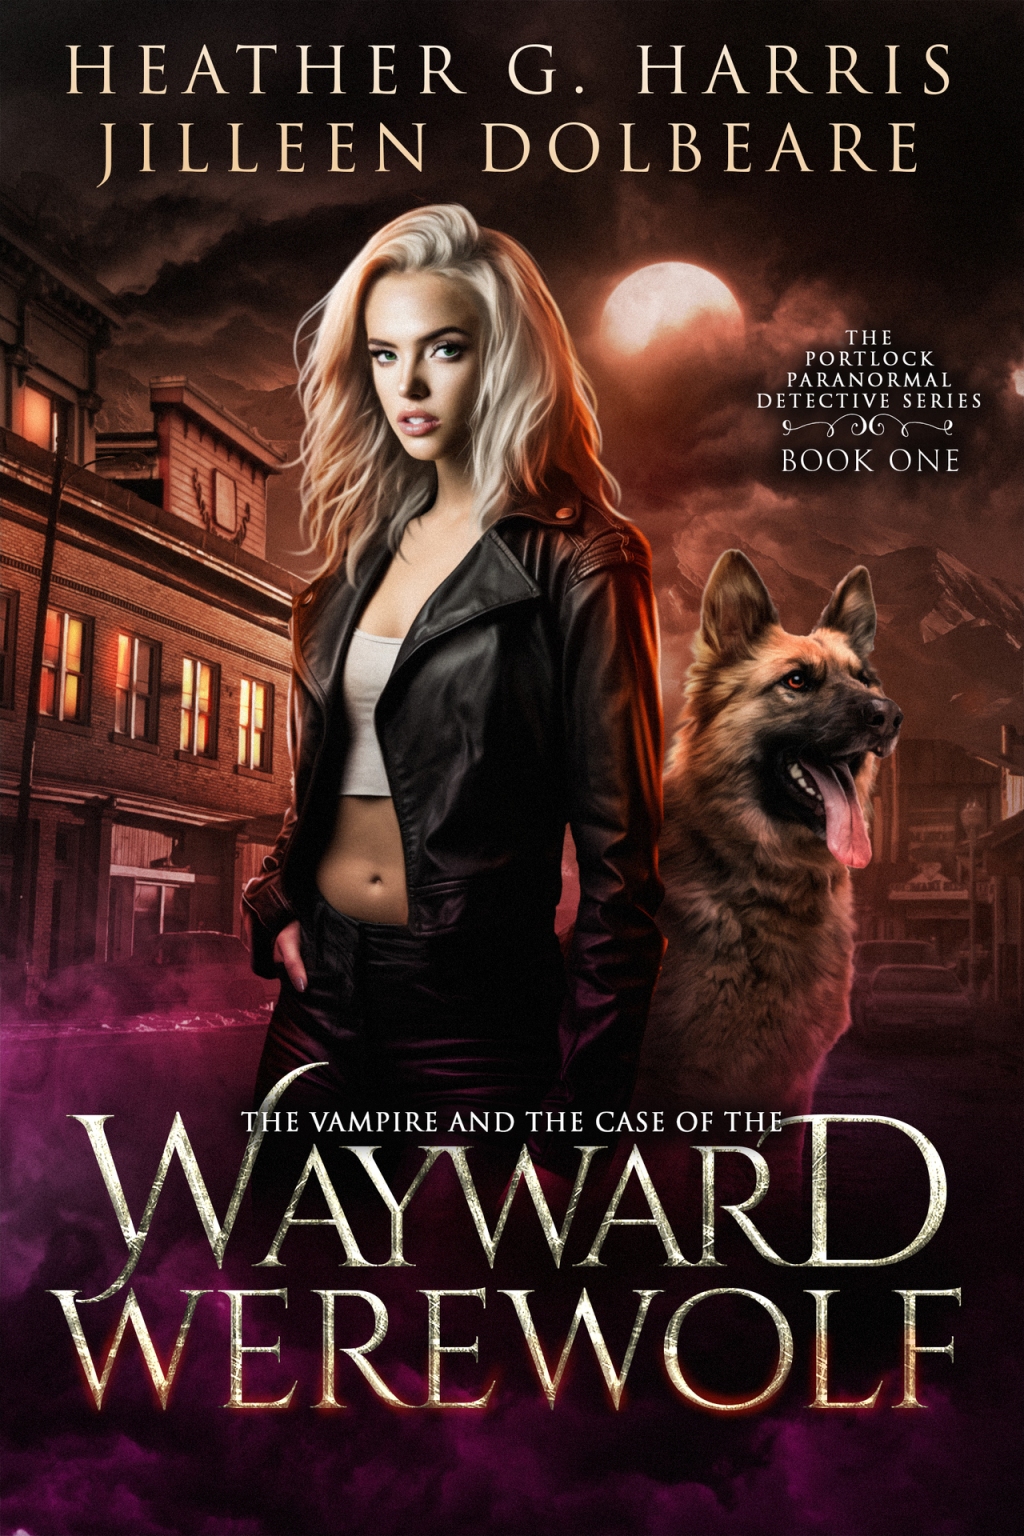 The Vampire and the Case of the Wayward Werewolf – Quite good urban fantasy.